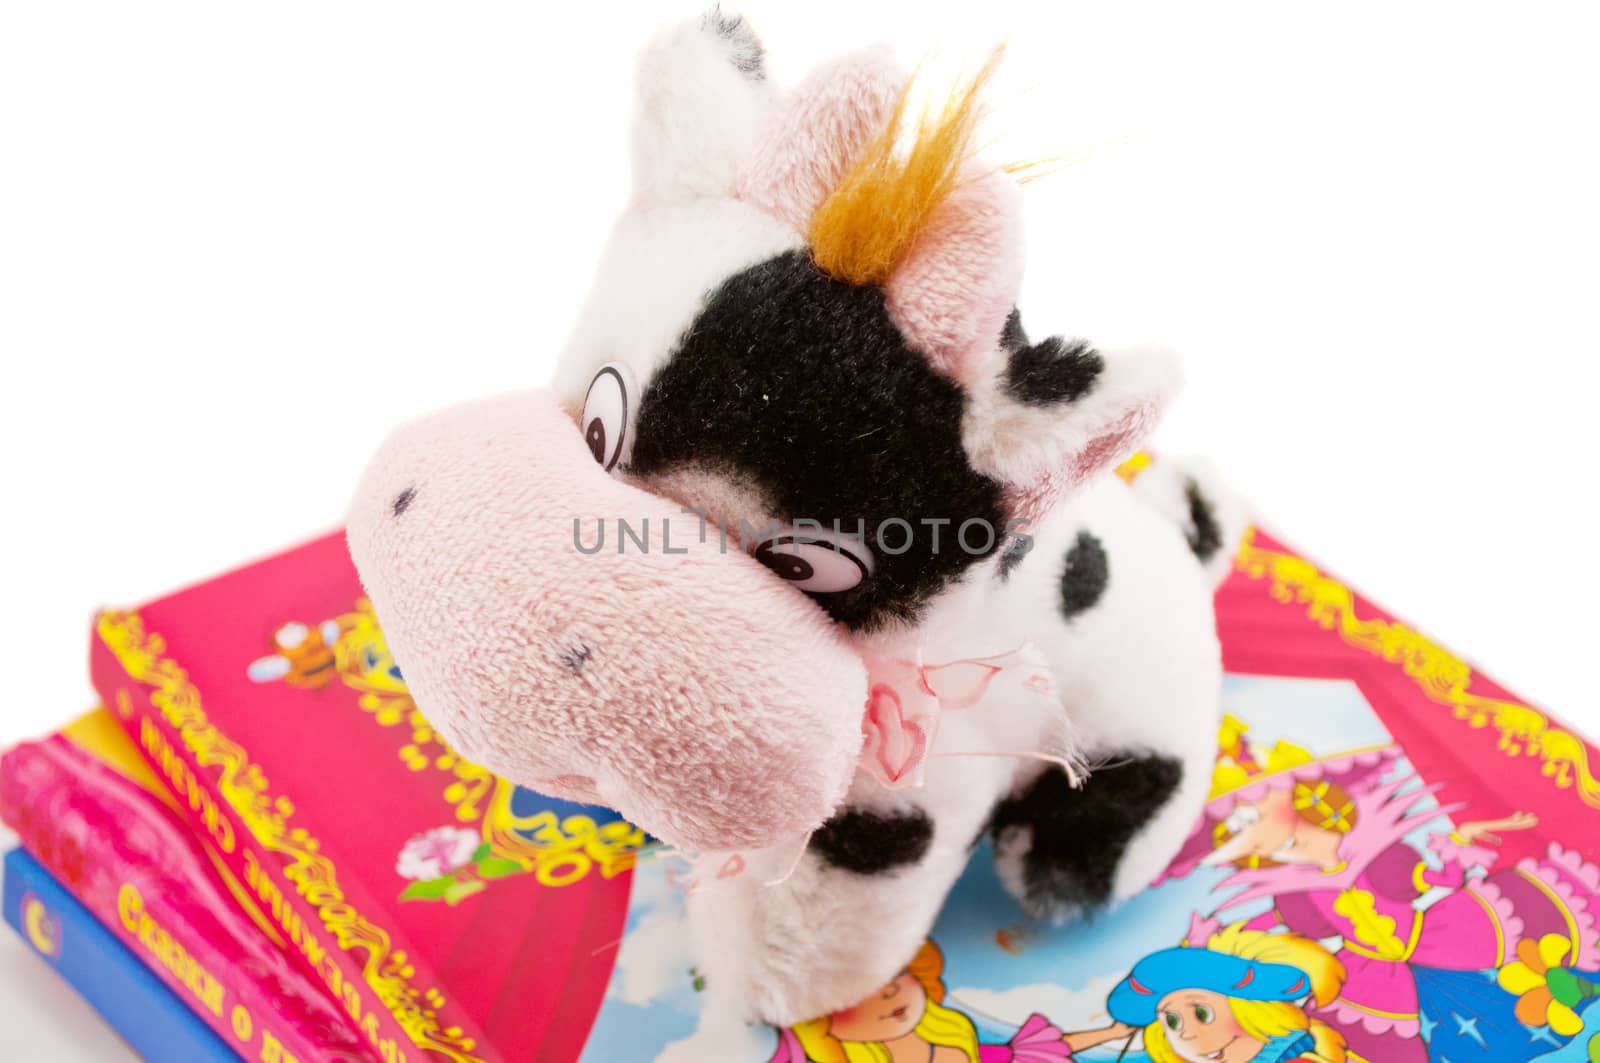 soft toy cow on a pile of books